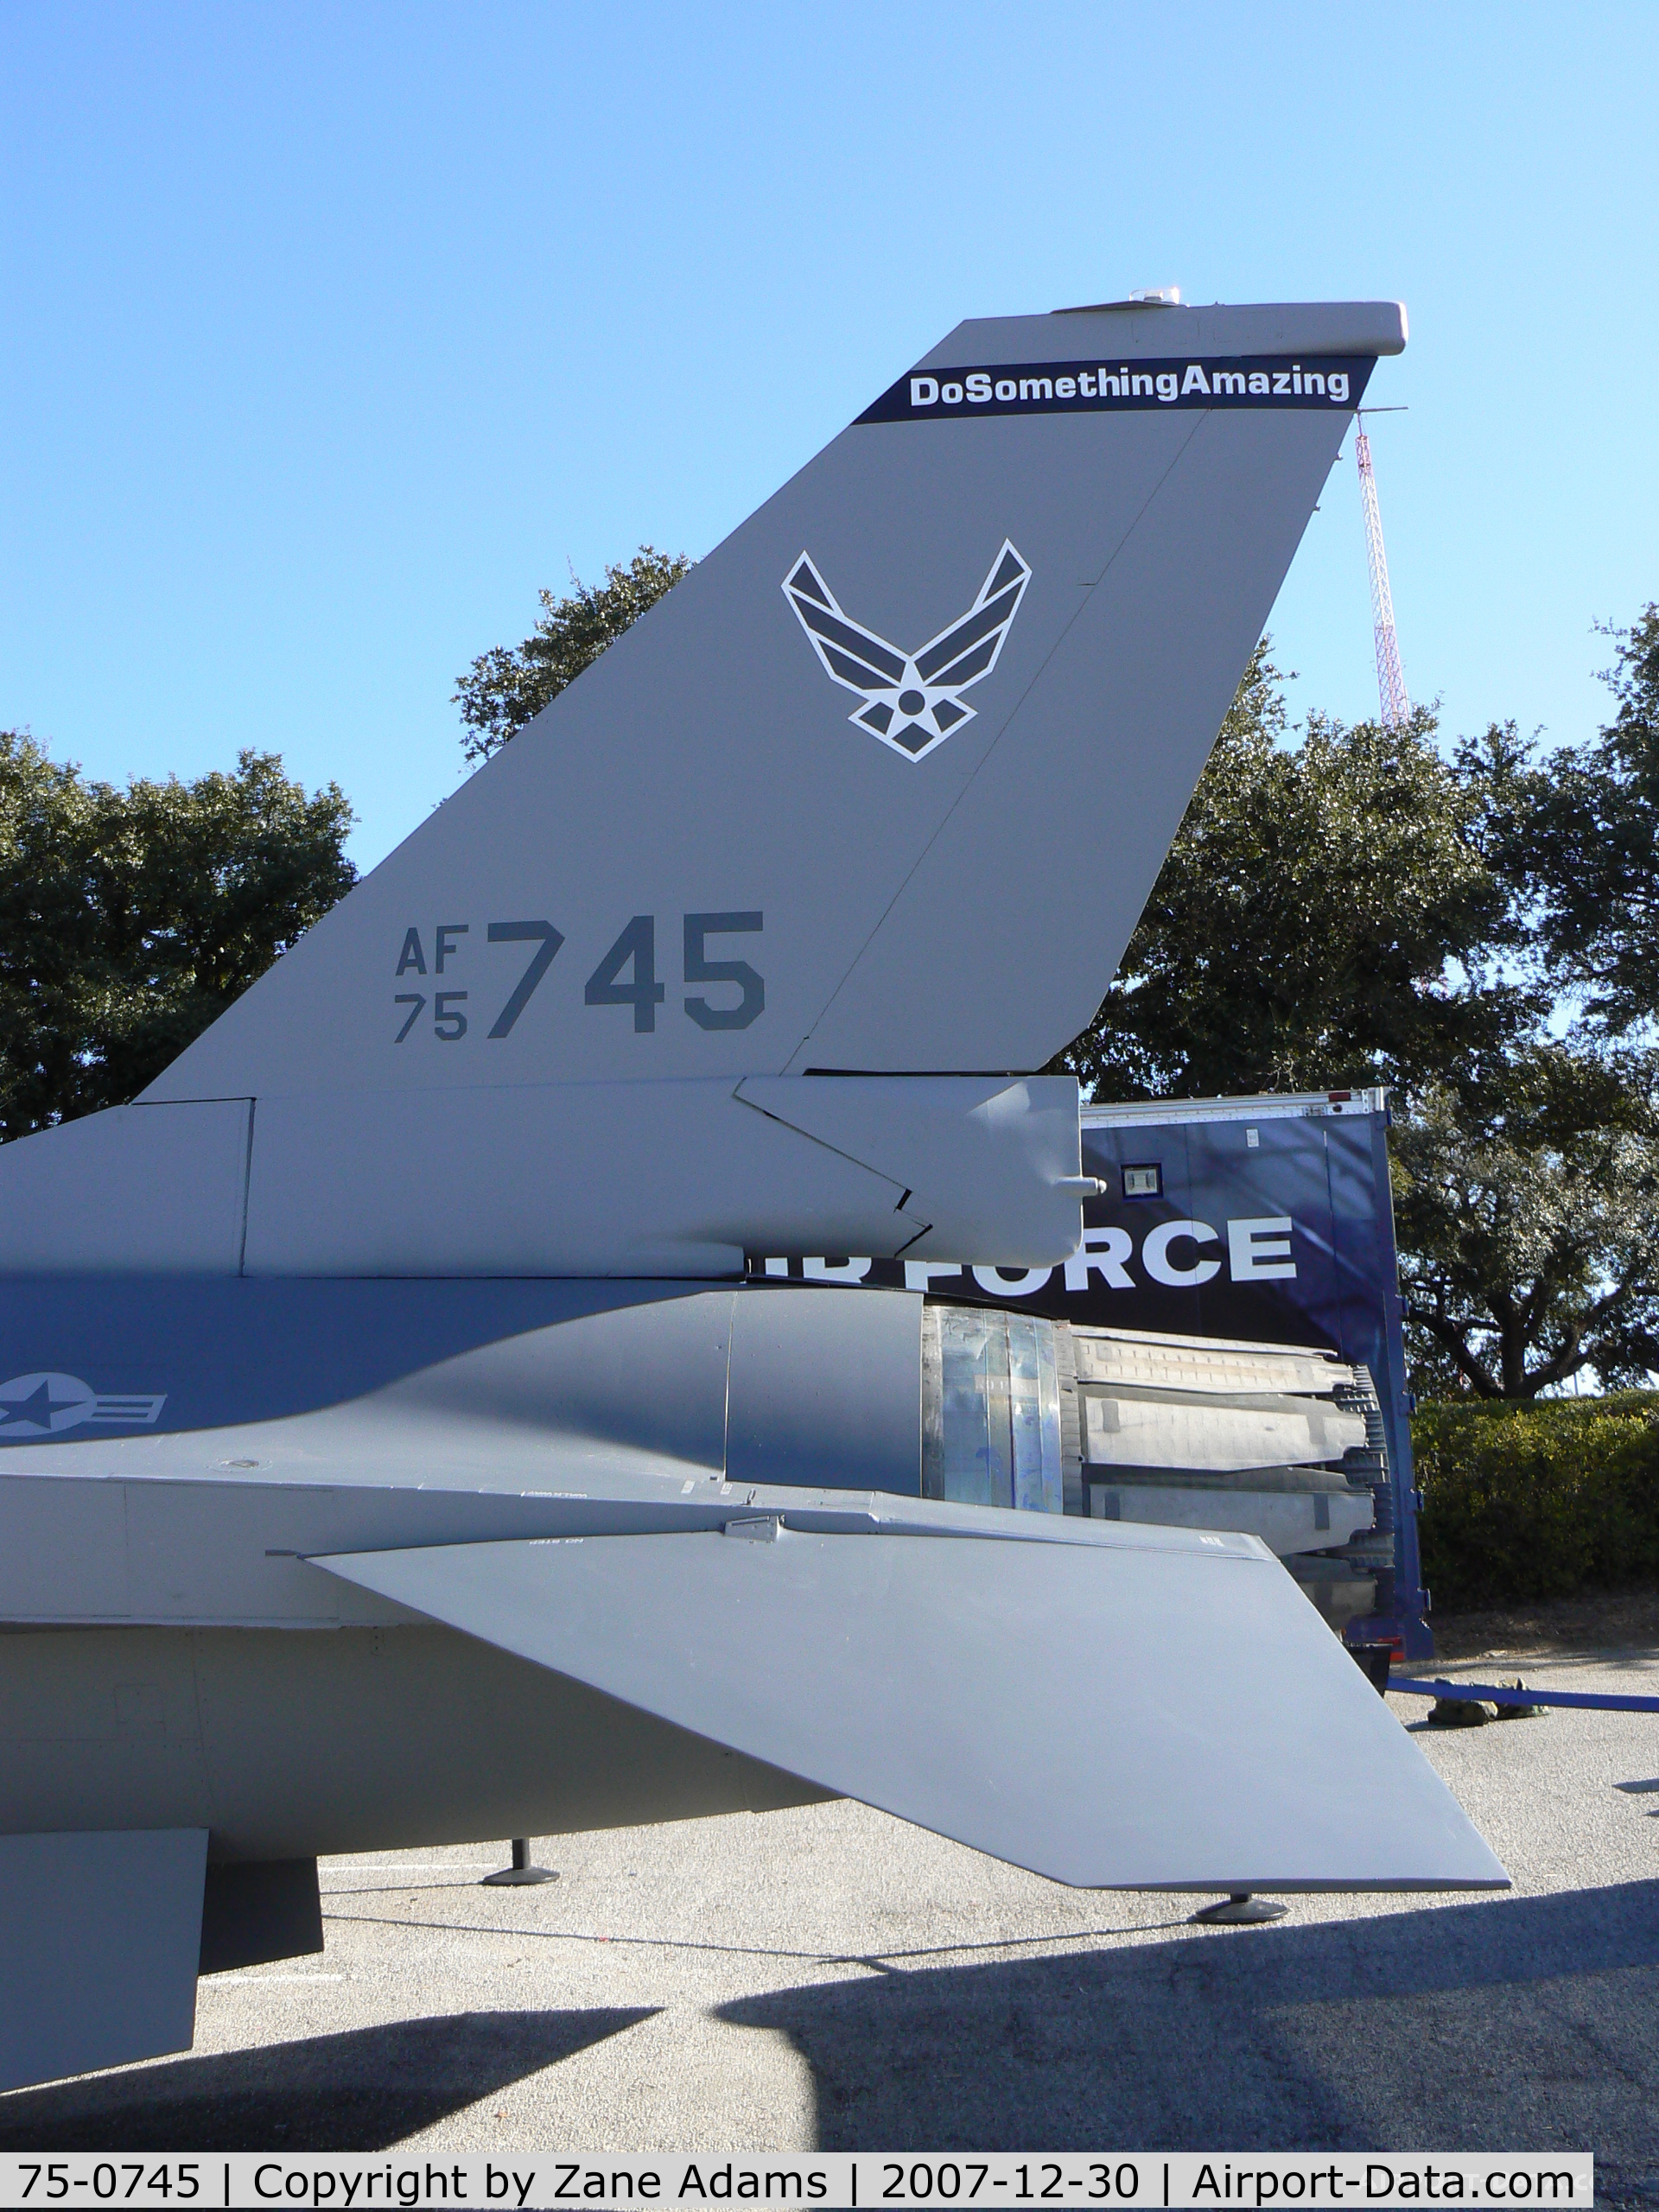 75-0745, 1977 General Dynamics YF-16A Fighting Falcon C/N 61-1, First Production F-16 - Now used as a traveling exhibit for USAF Recuriting - At TCU - Ft. Worth, TX